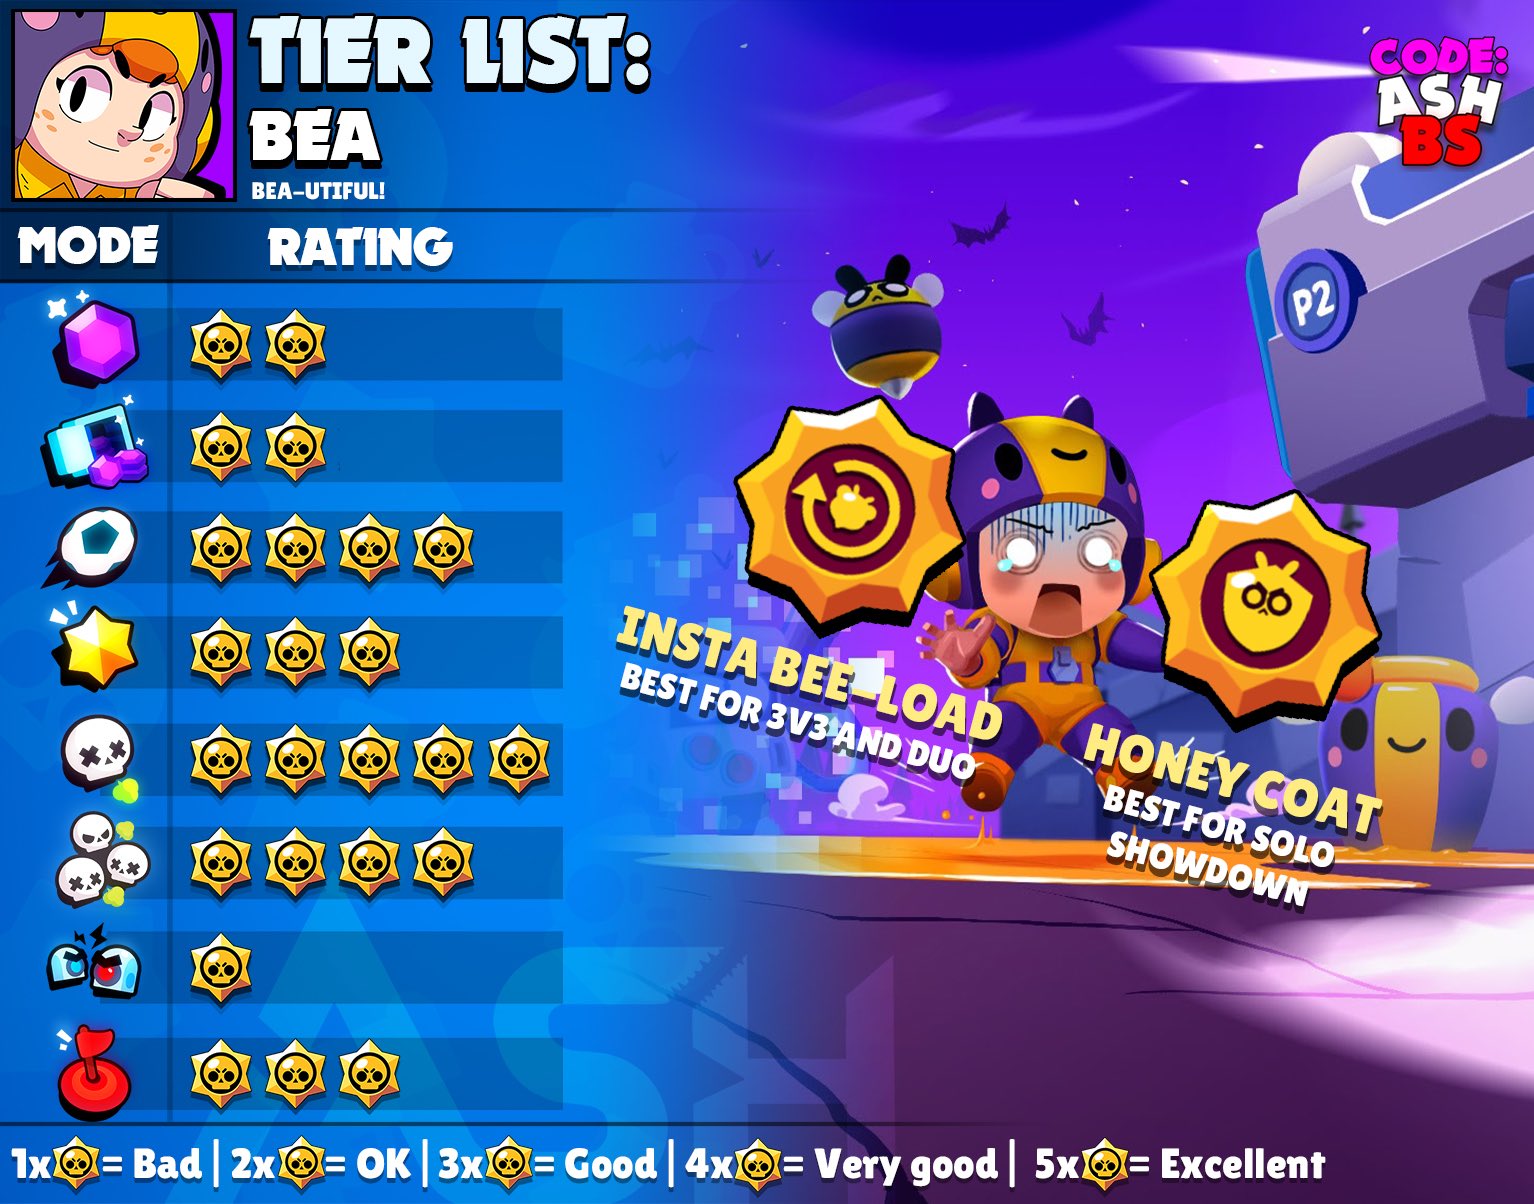 Code Ashbs Ar Twitter Bea Tier List For All Game Modes And The Best Maps To Use Her In With Suggested Comps Which Brawler Should I Do Next Brawlstars Https T Co 6i1klls8y9 - brawl stars siege tier list